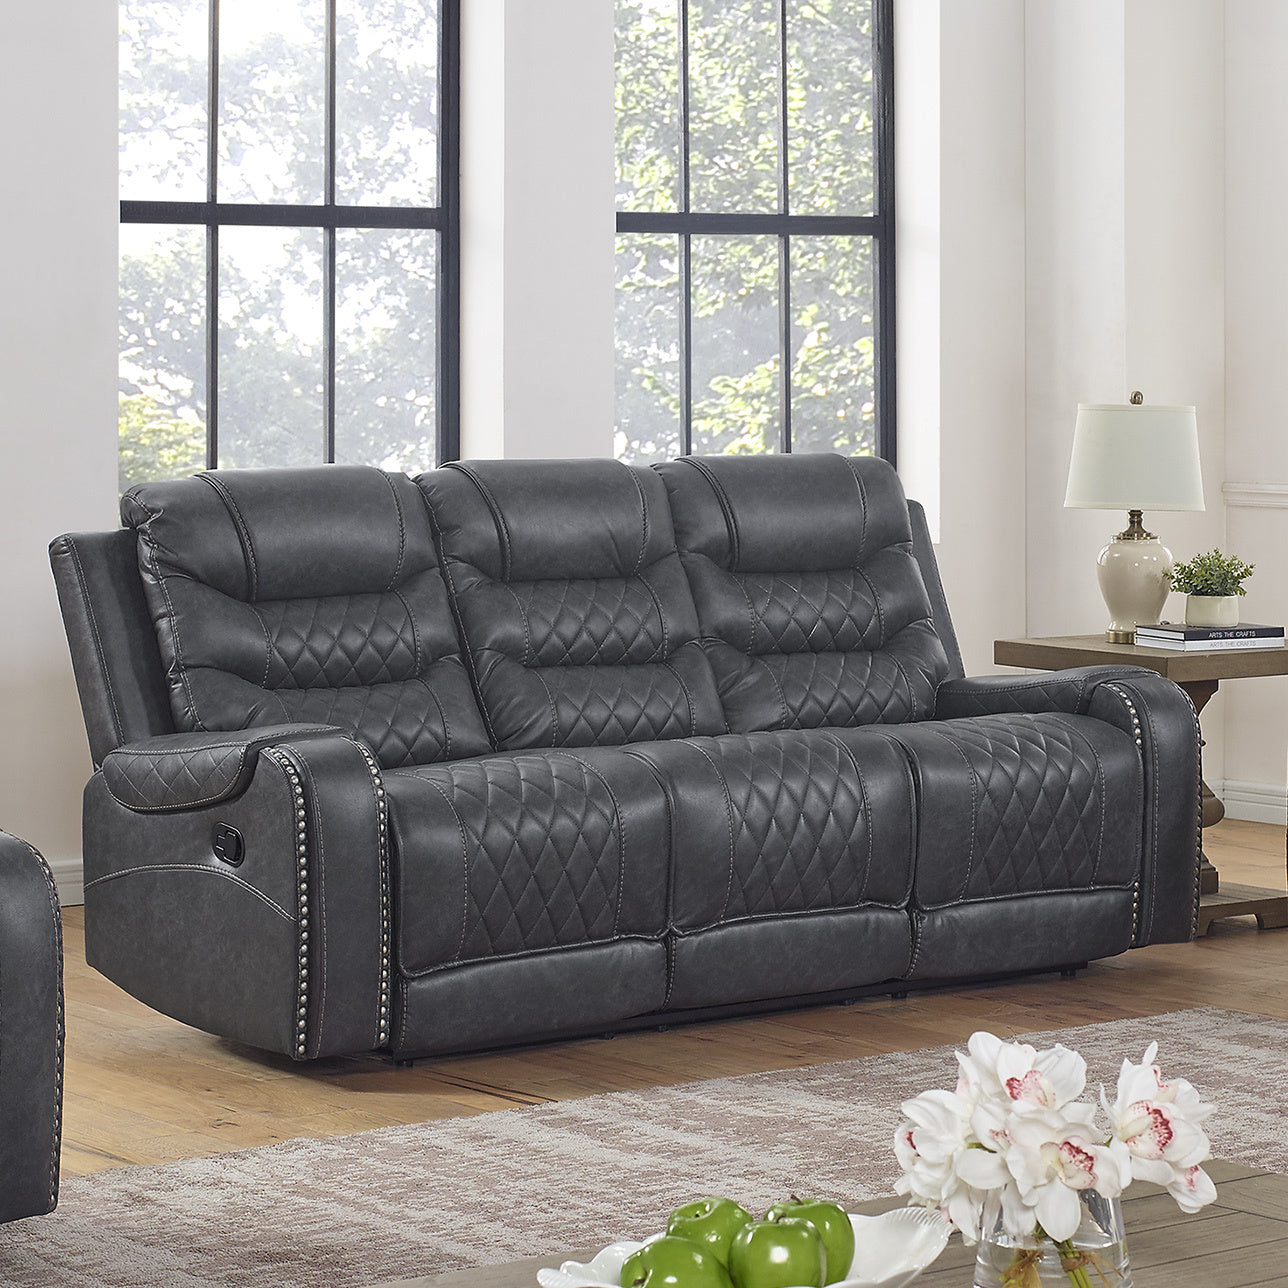 Klens Faux Leather Reclining Sofa With